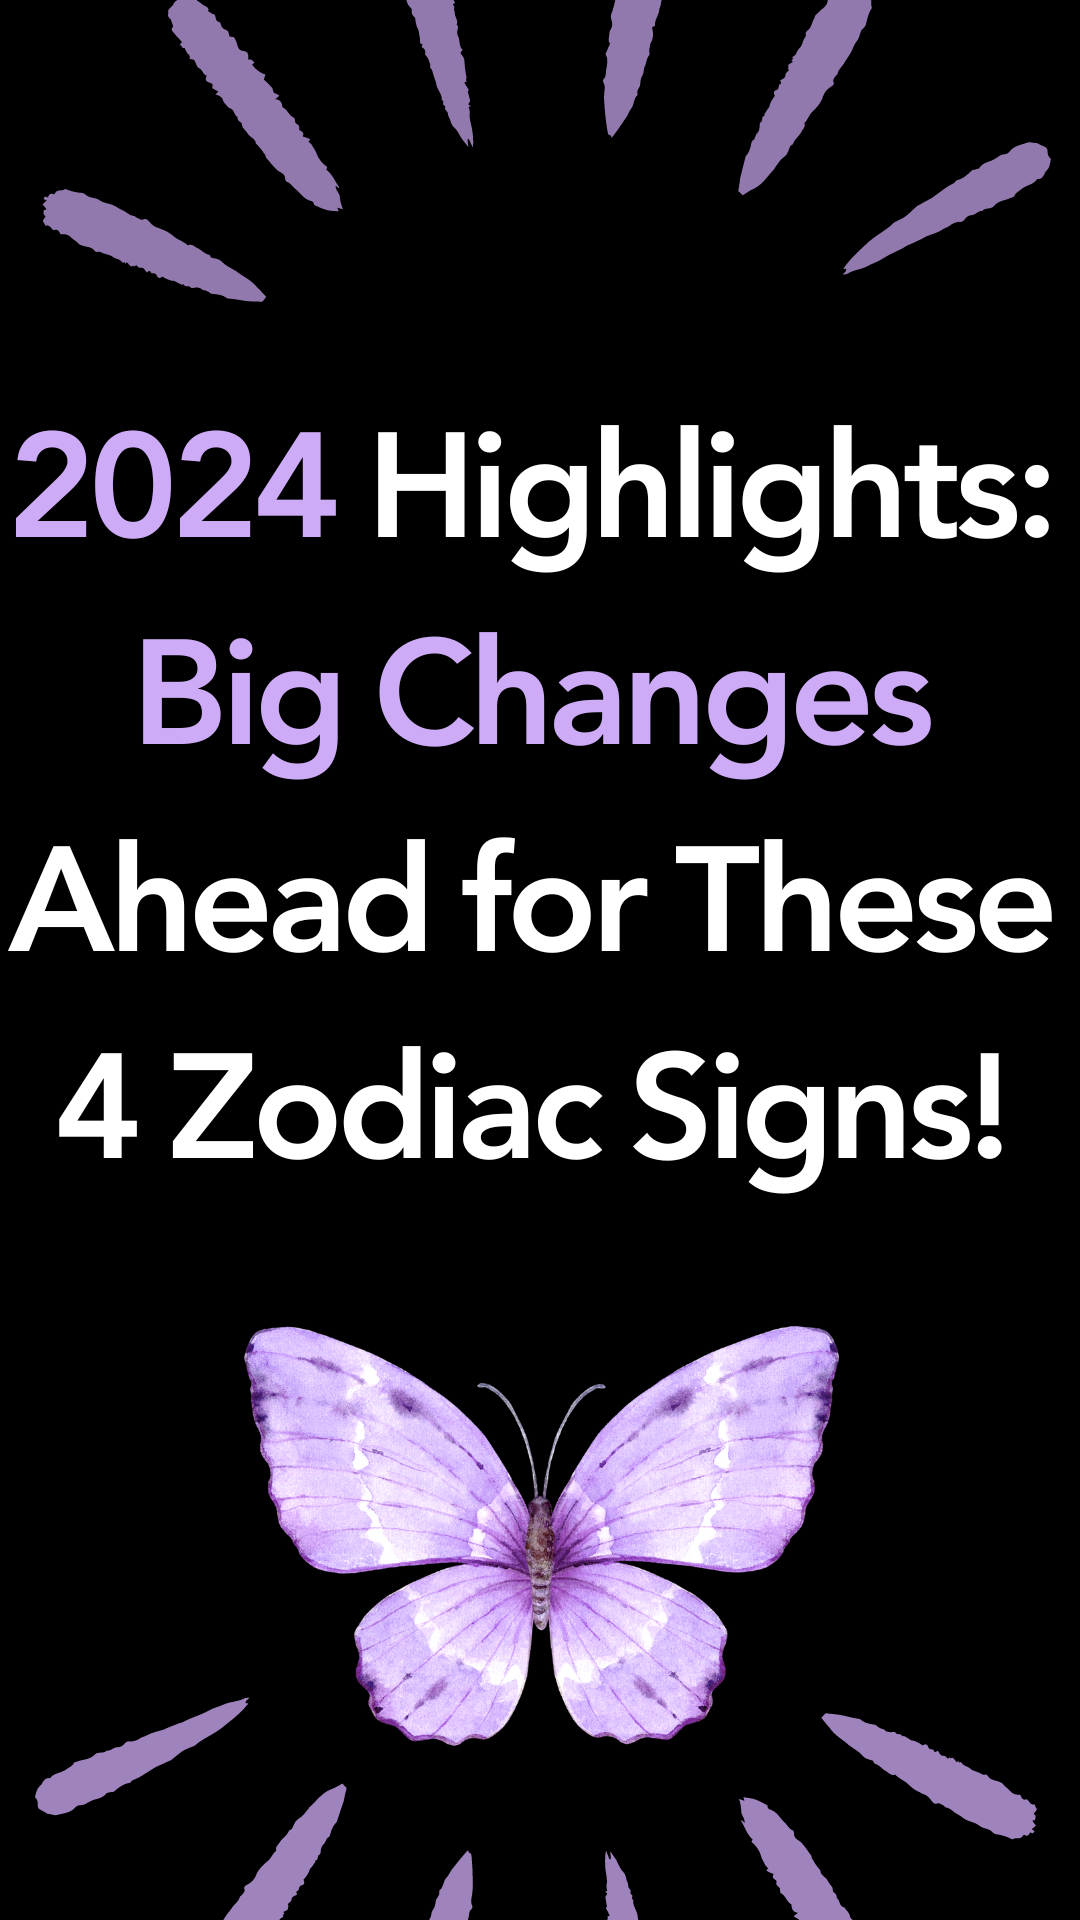 2024 Highlights: Big Changes Ahead for These 4 Zodiac Signs!